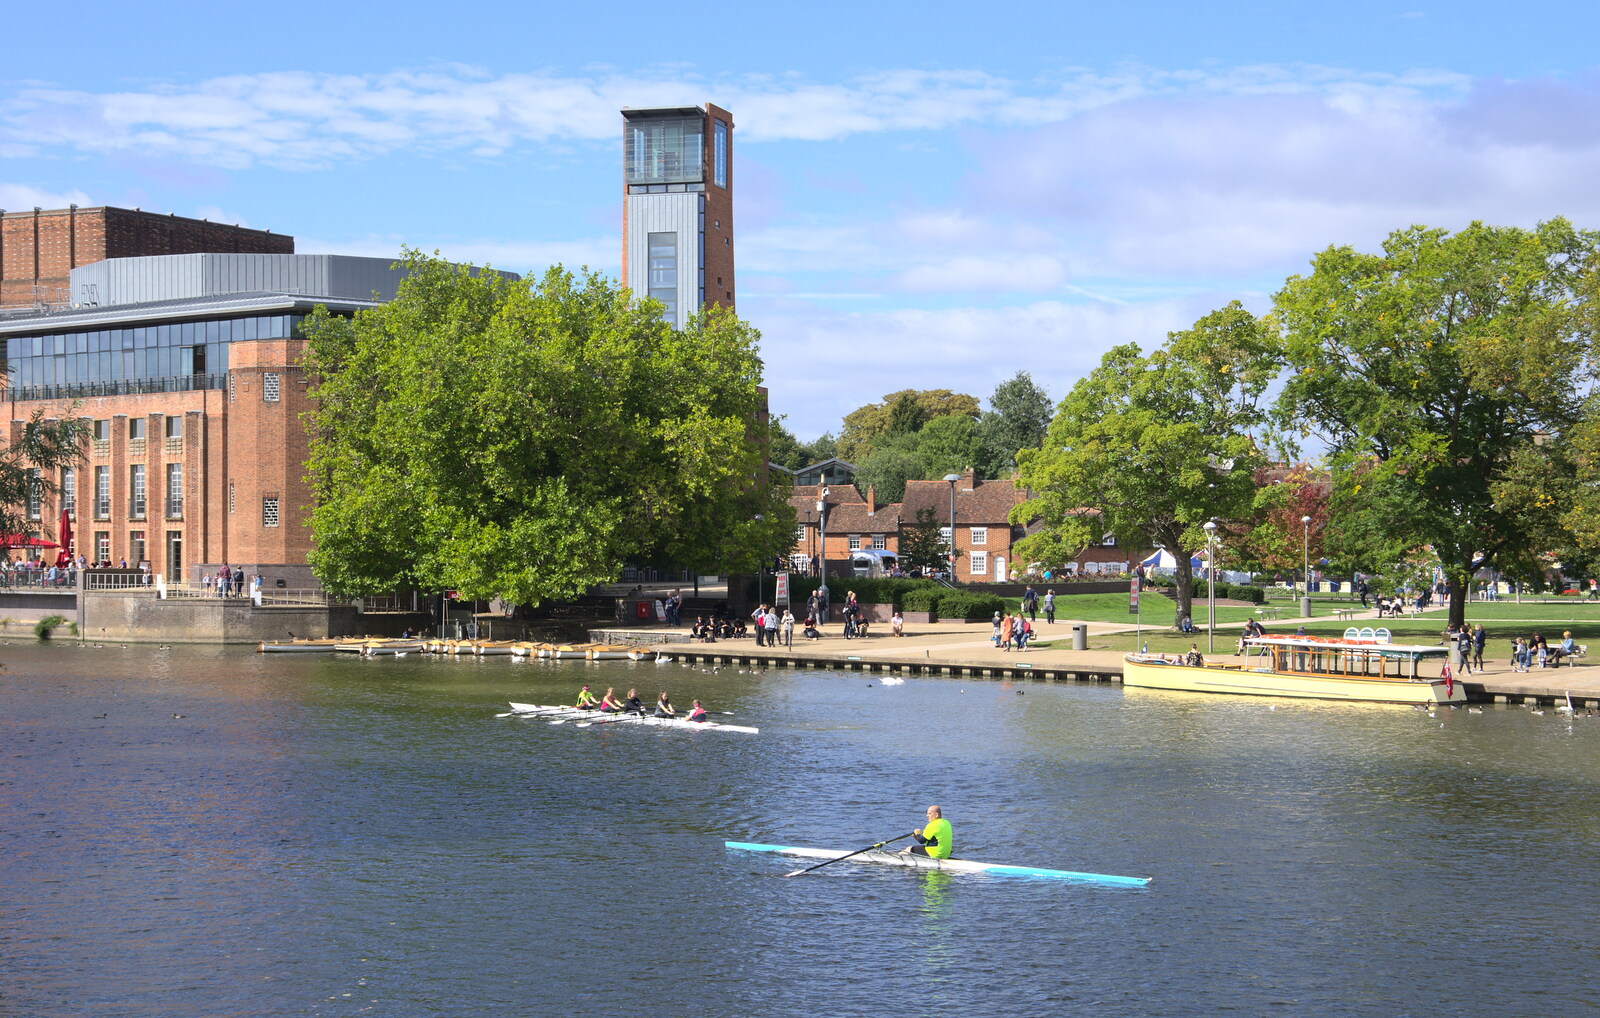 Rowers on the River Avon by the theatre from A Postcard from Stratford-upon-Avon, Warwickshire - 9th September 2018